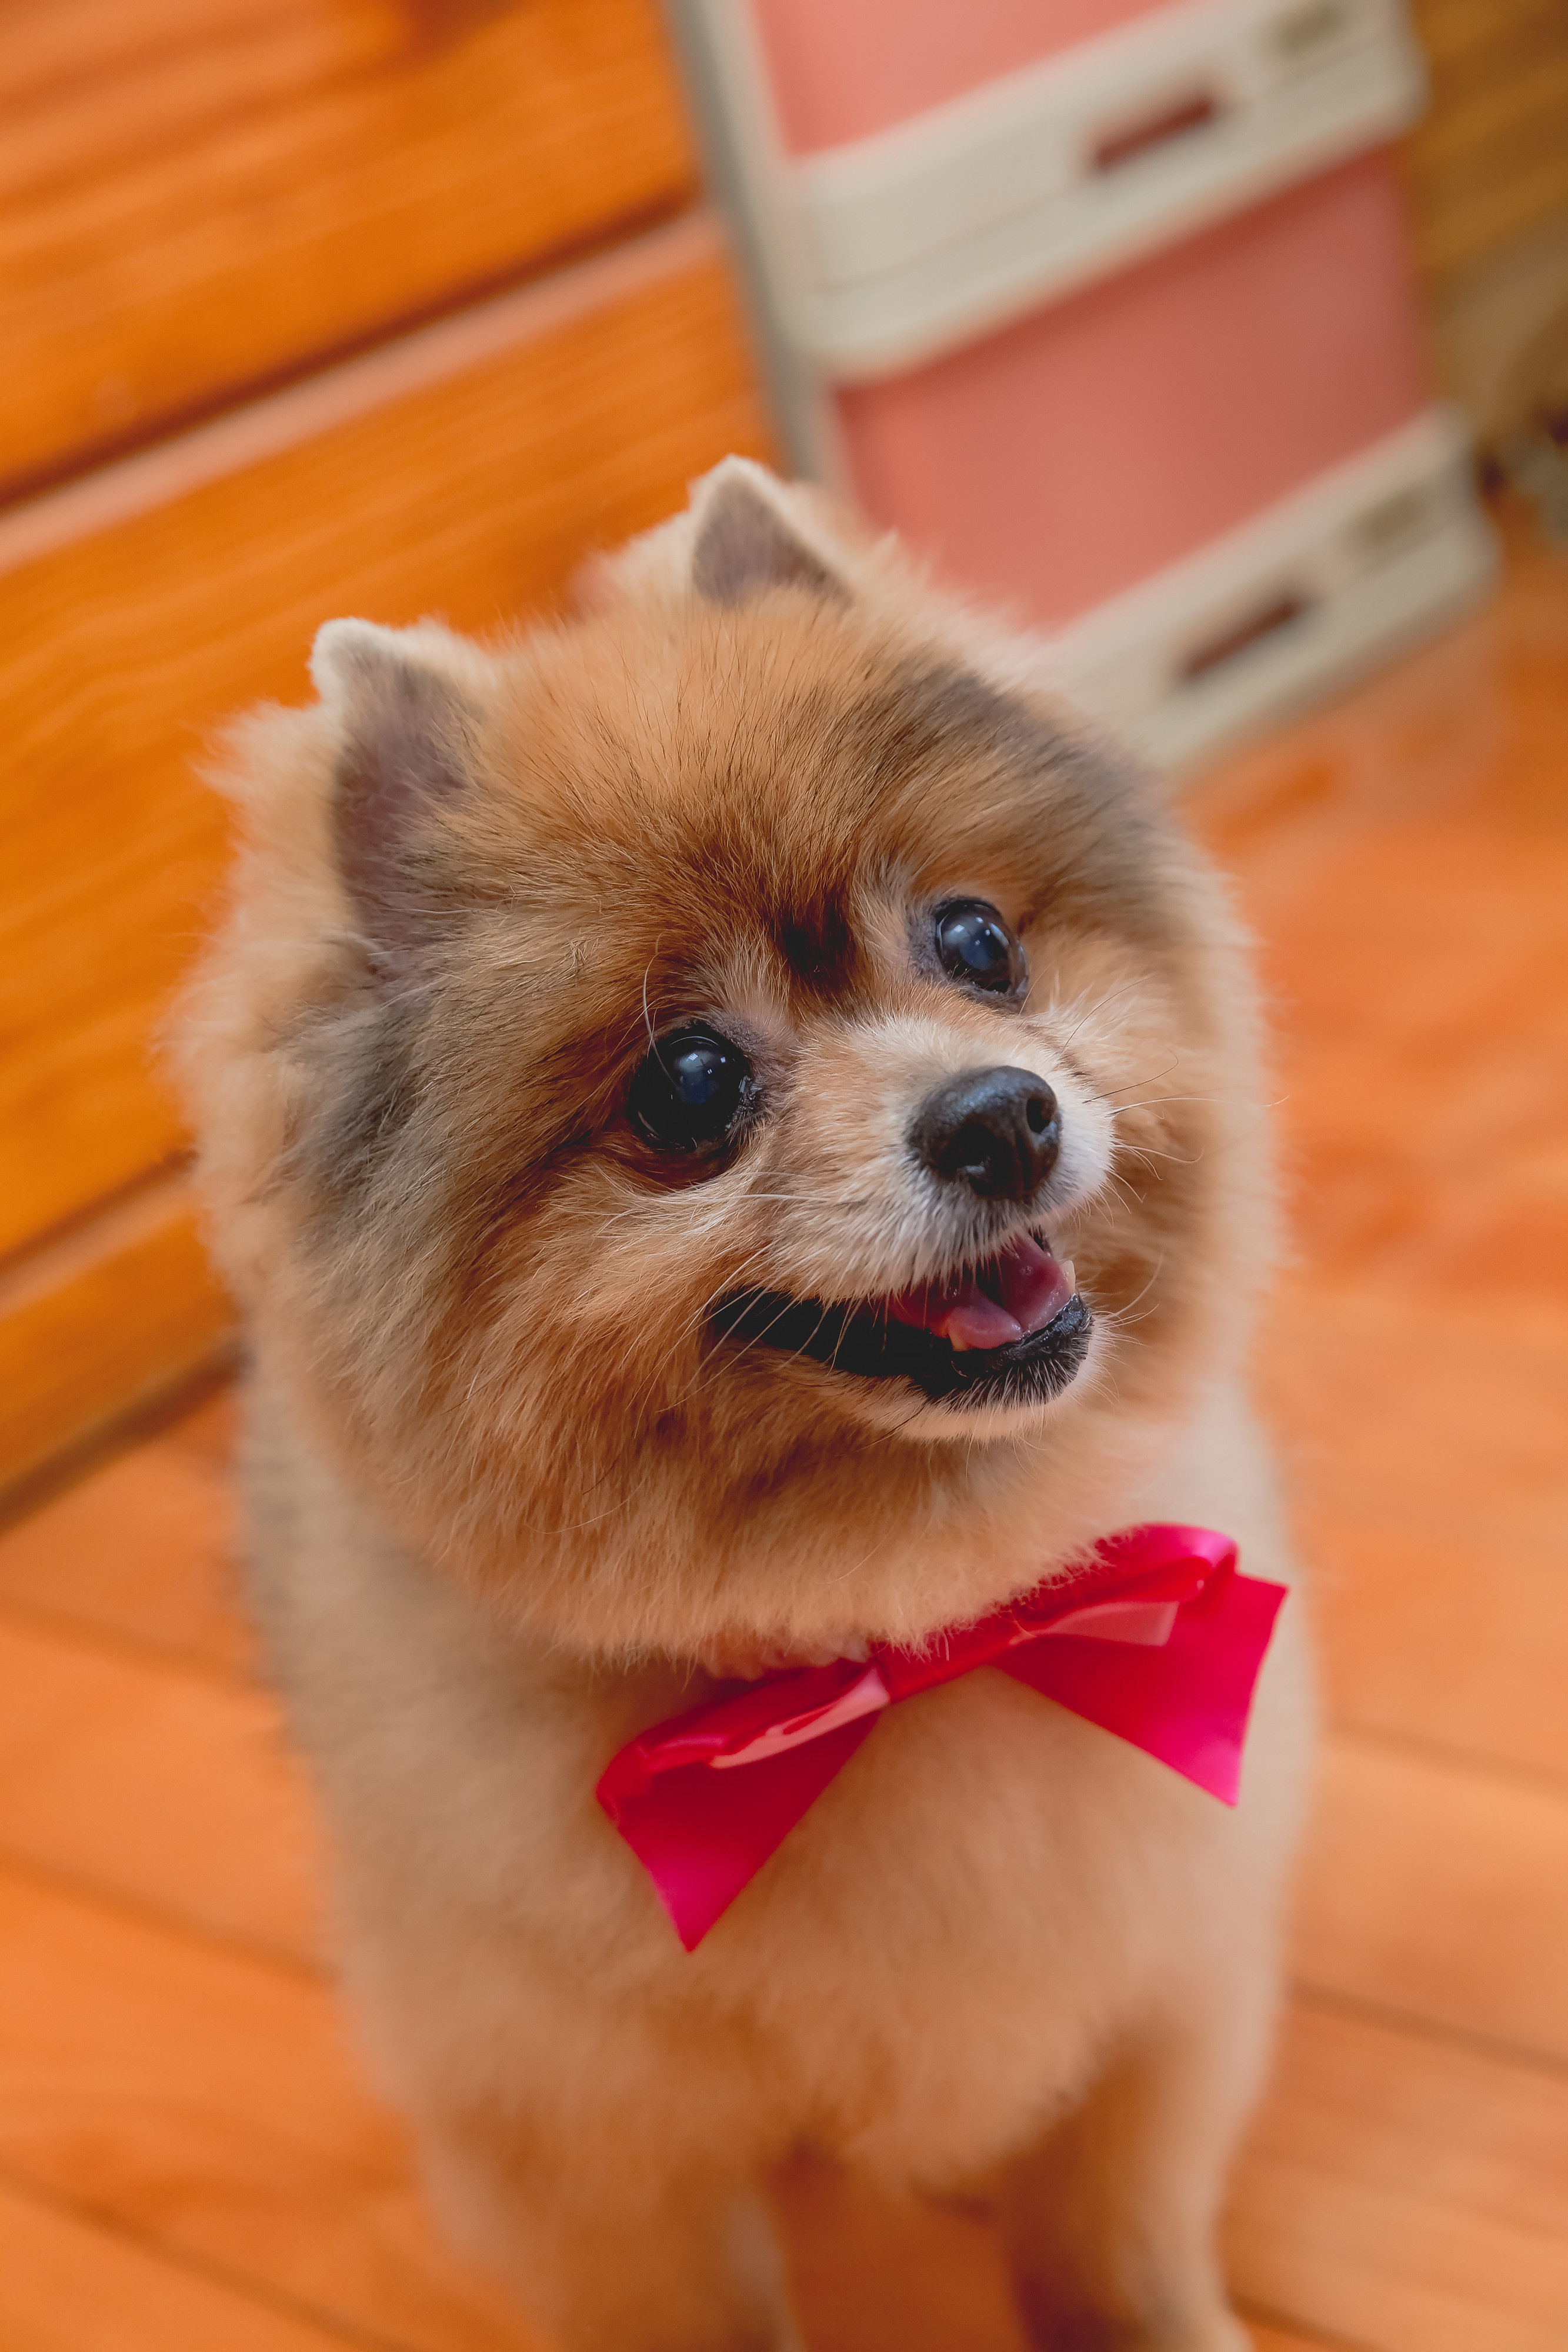 Download PC Wallpaper dog, animals, protruding tongue, tongue stuck out, bow, spitz